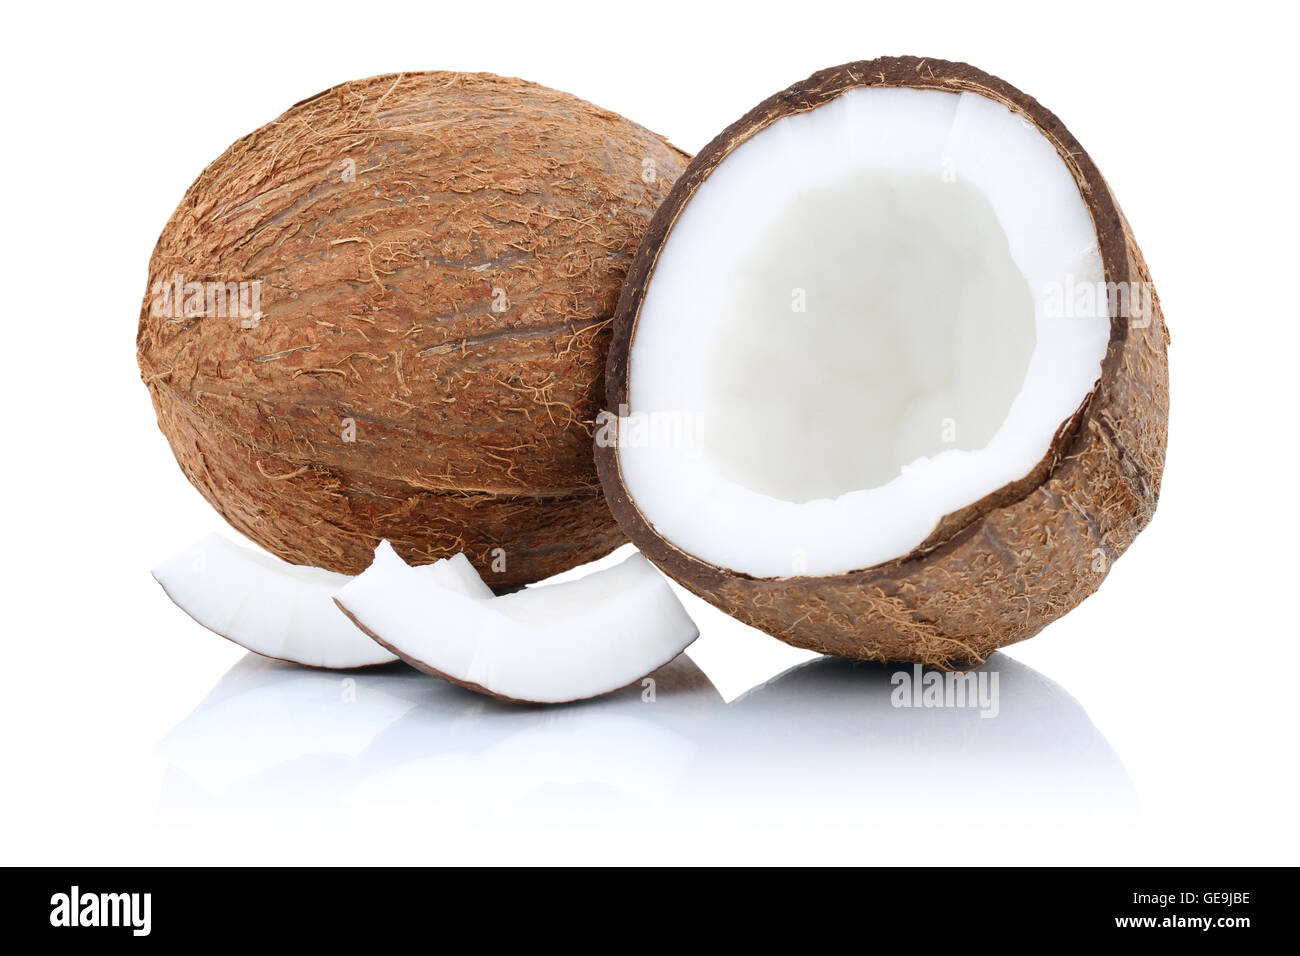 Coconut coconuts fruit half fruits isolated on a white background Stock Photo